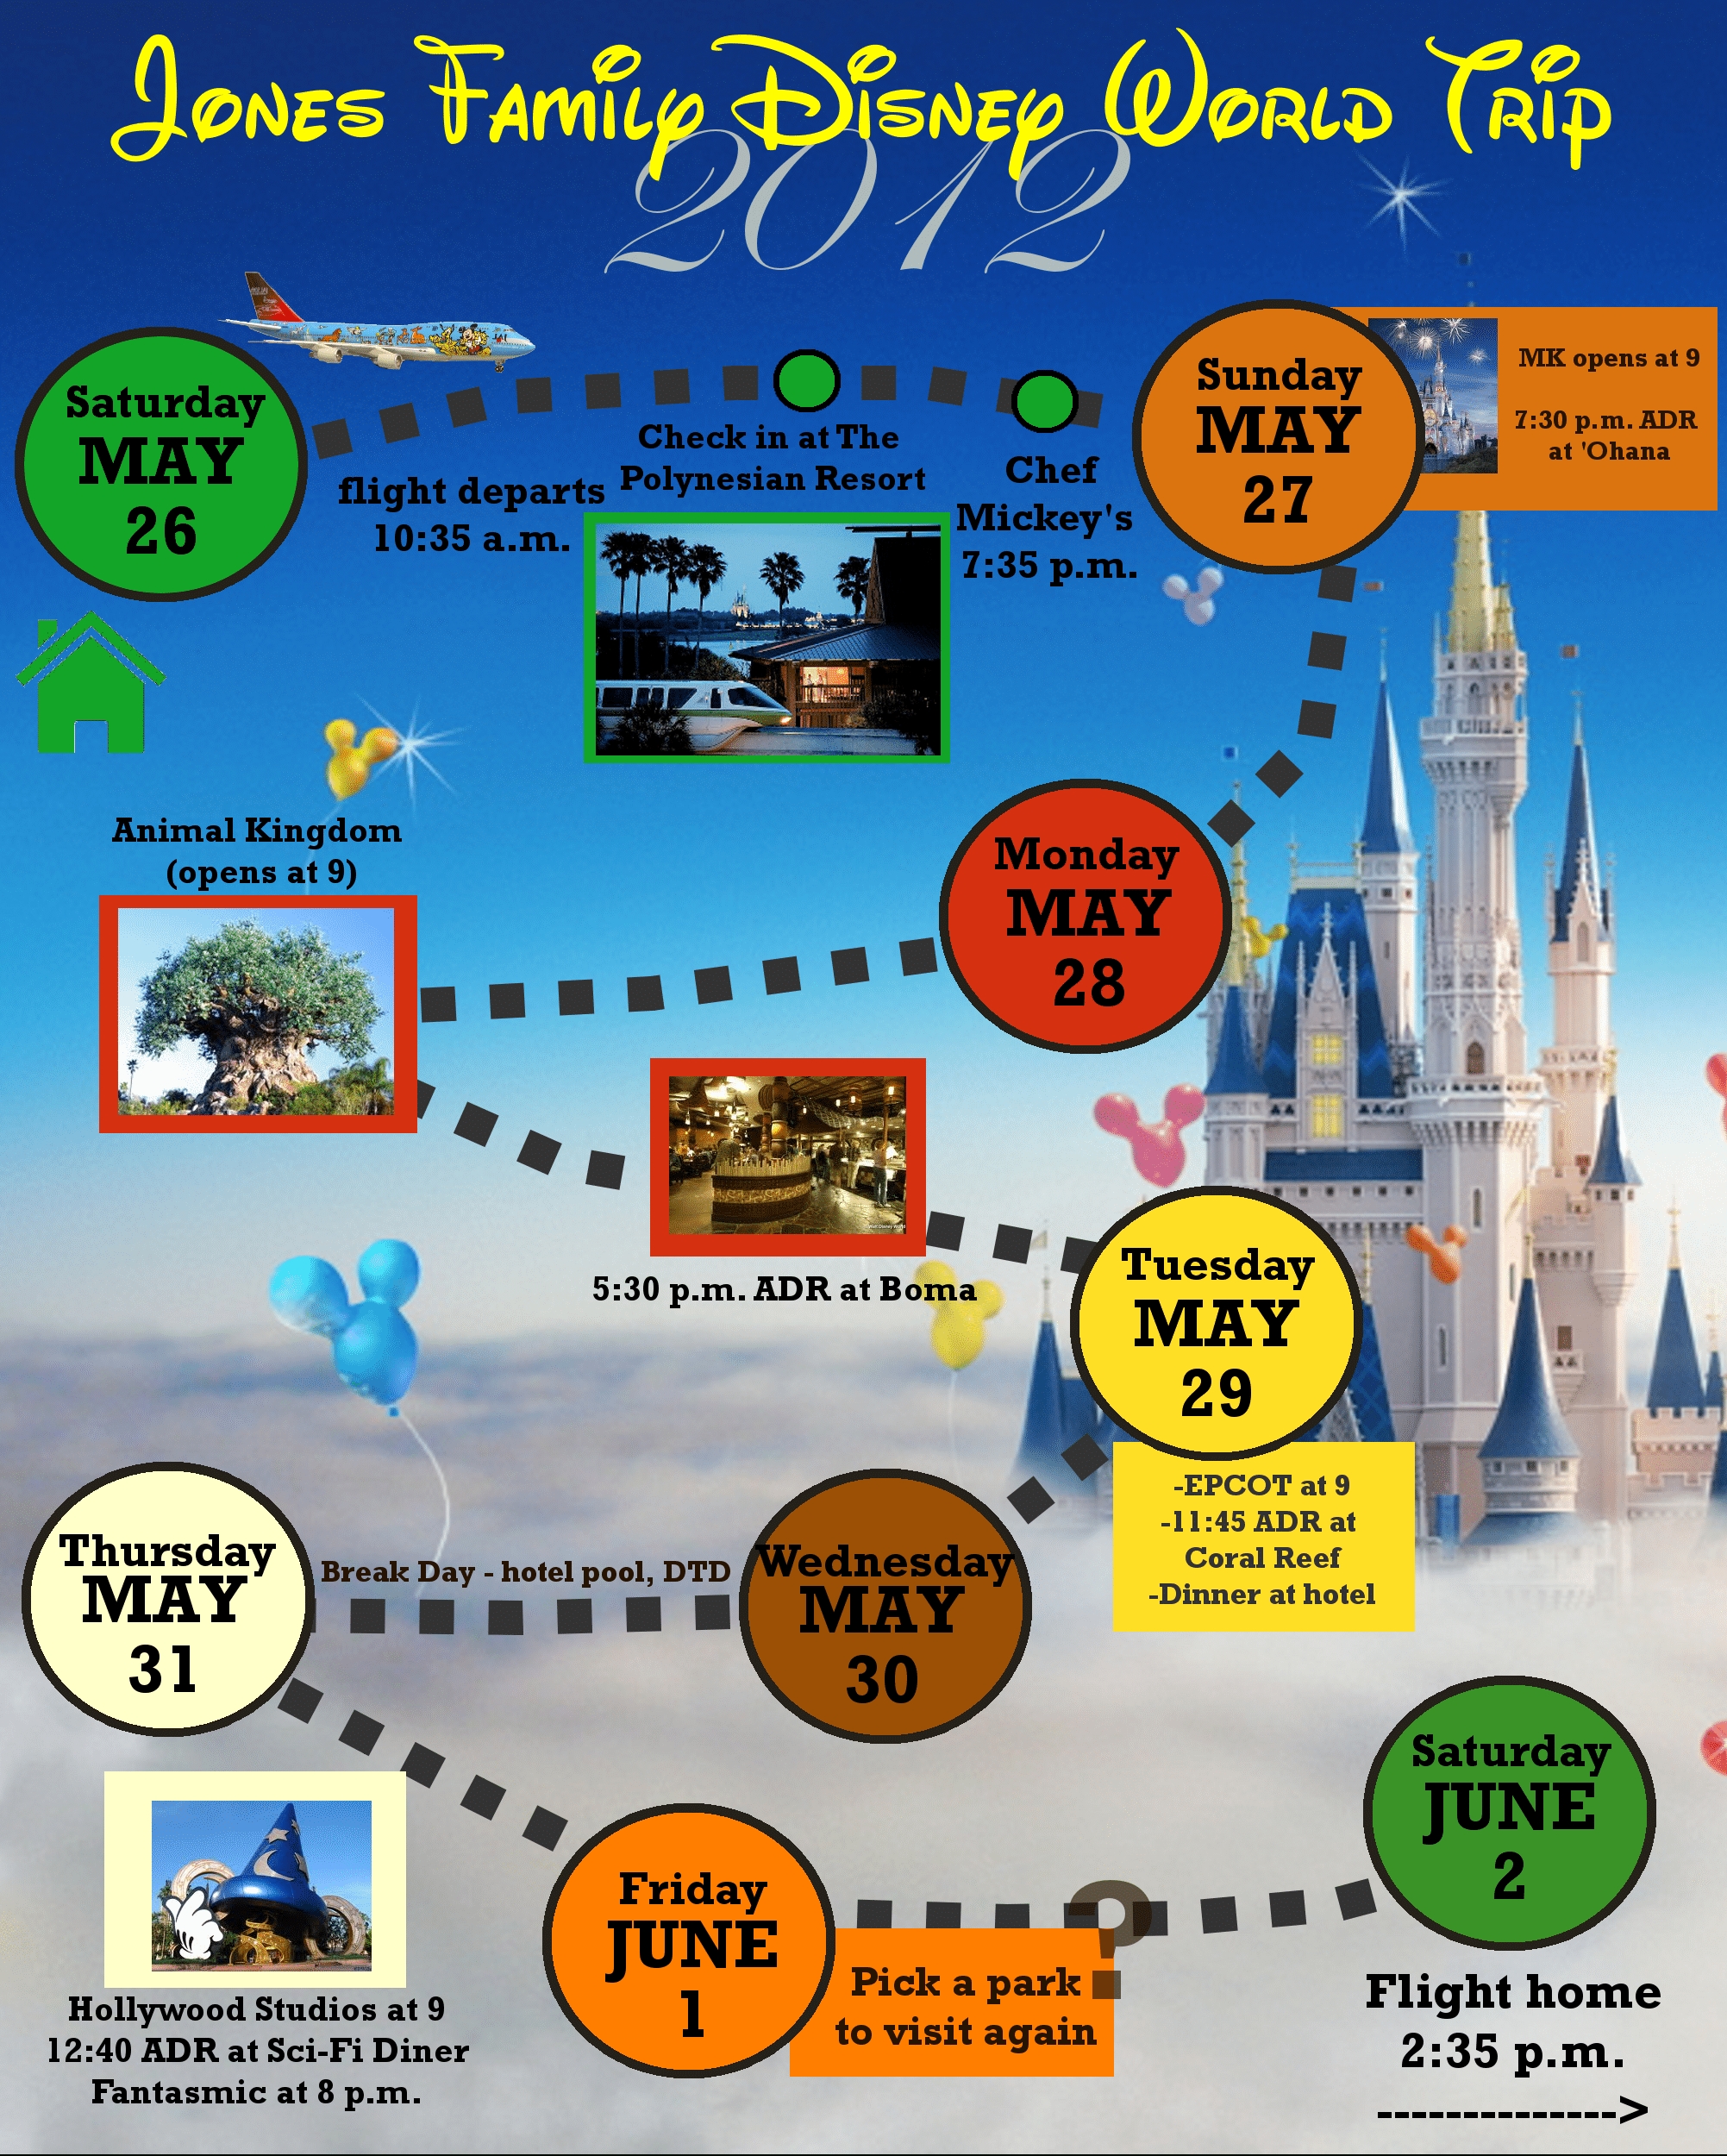 2 Custom Disney World Itinerary Templates | Wdw Prep School intended for Disneyland Itinerary Template For Mac